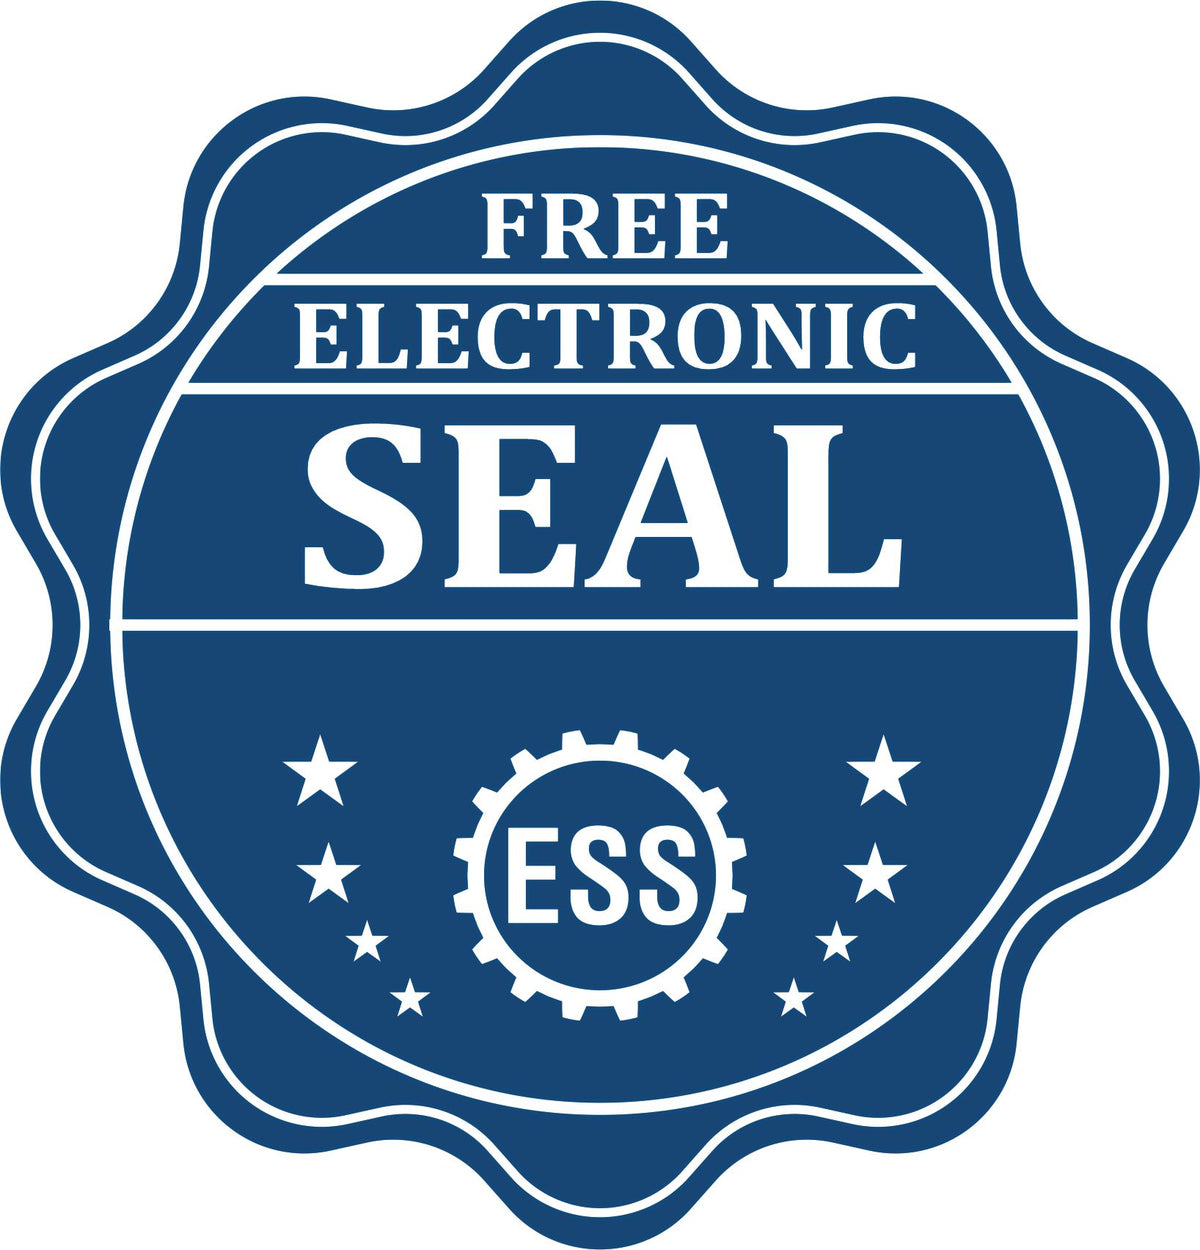 A badge showing a free electronic seal for the Hybrid New York Geologist Seal with stars and the ESS gear on the emblem.